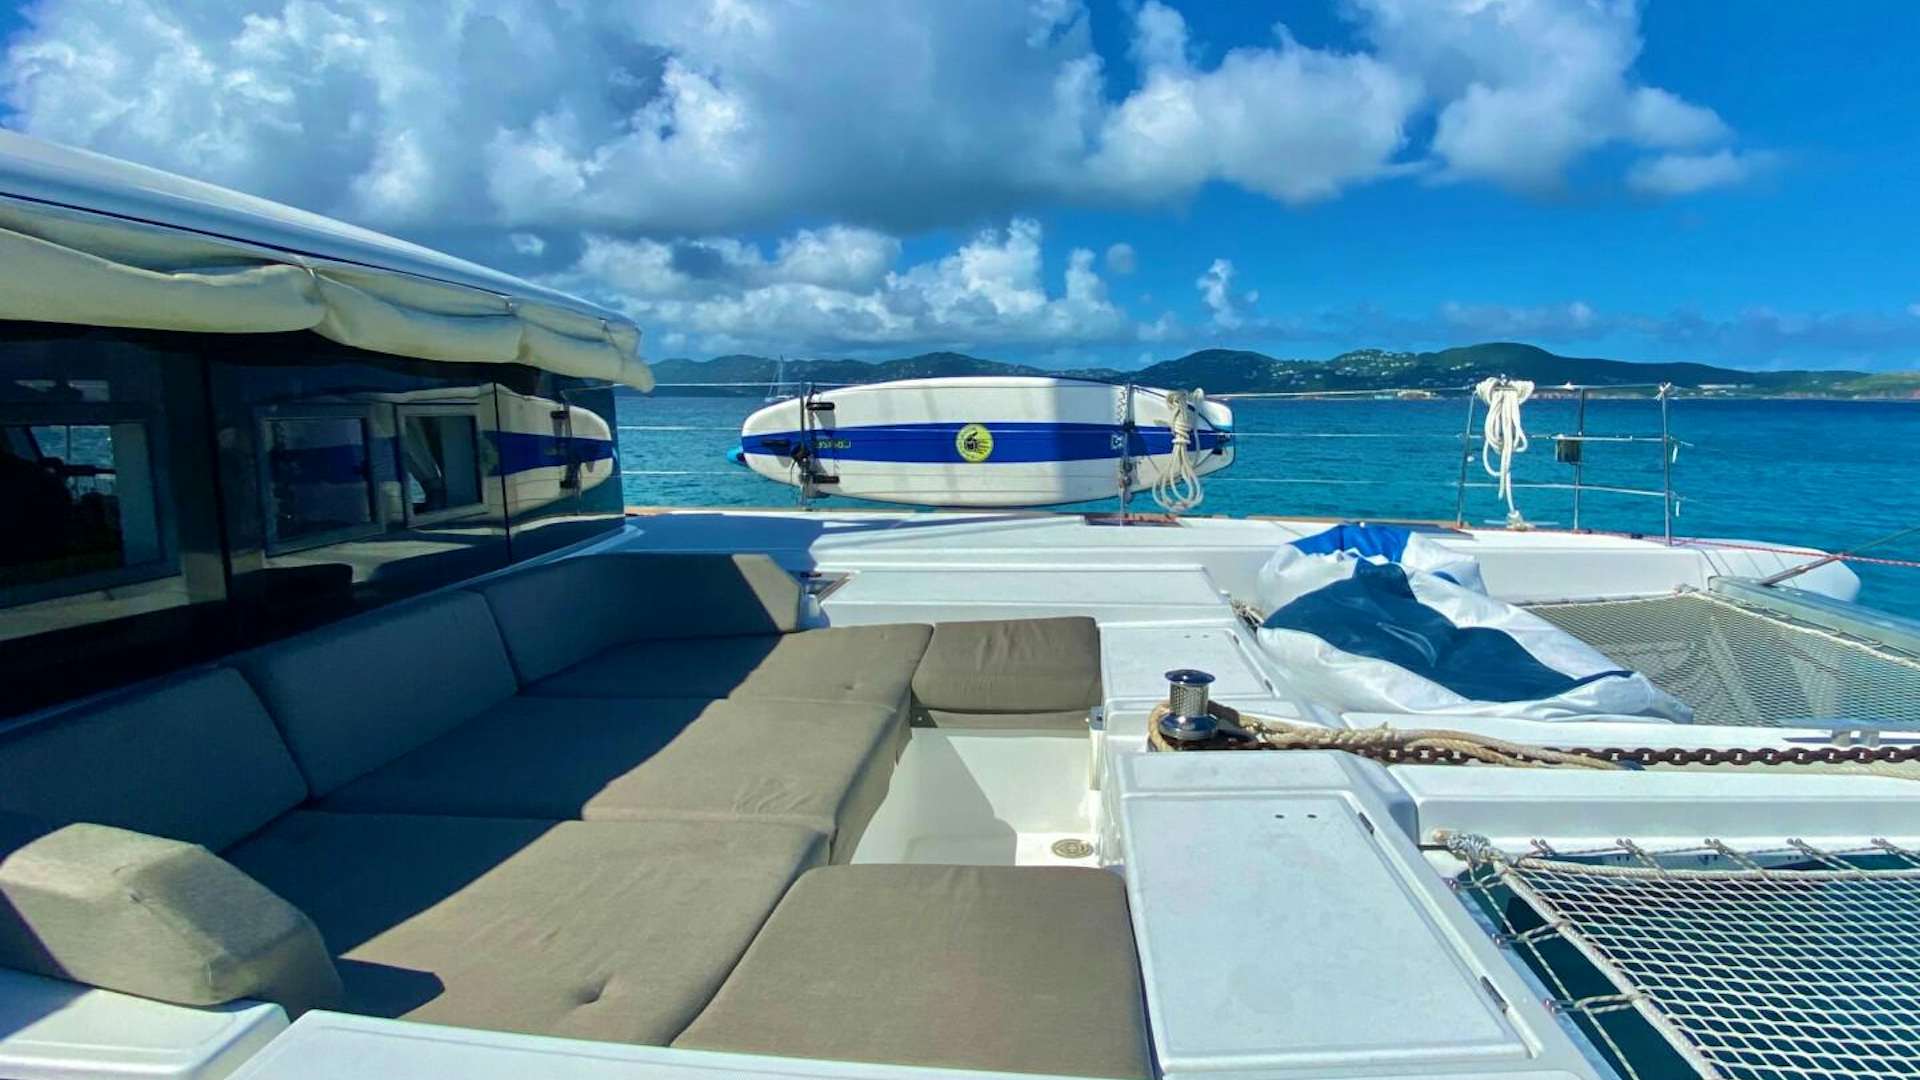 Rumba
Yacht for Sale